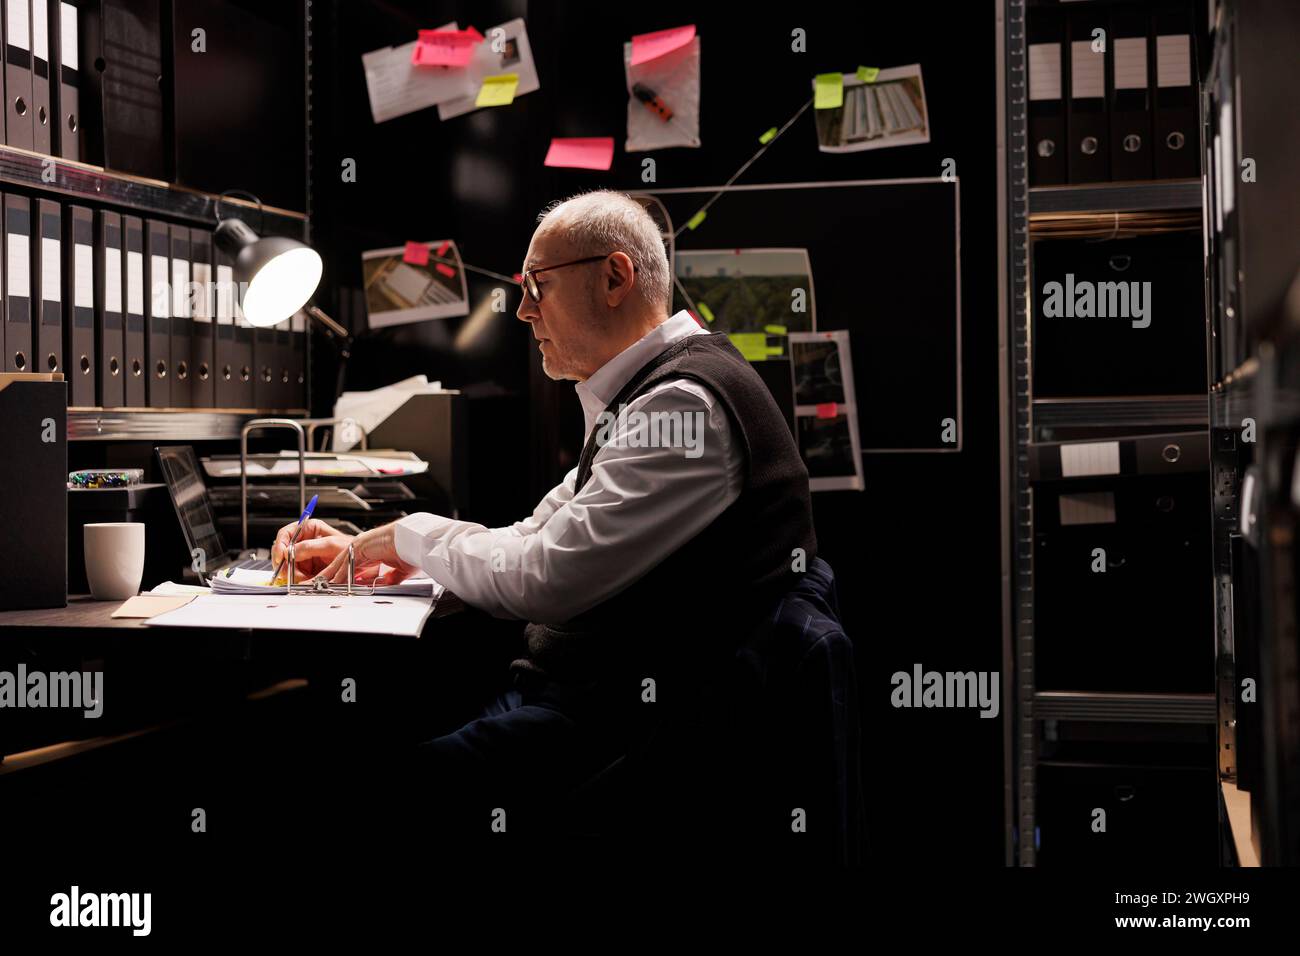 Elderly private detective writing criminal case report, working late at night at federal investigations in arhive room. Senior police officer analyzing crime scene evidence, checking suspect files Stock Photo